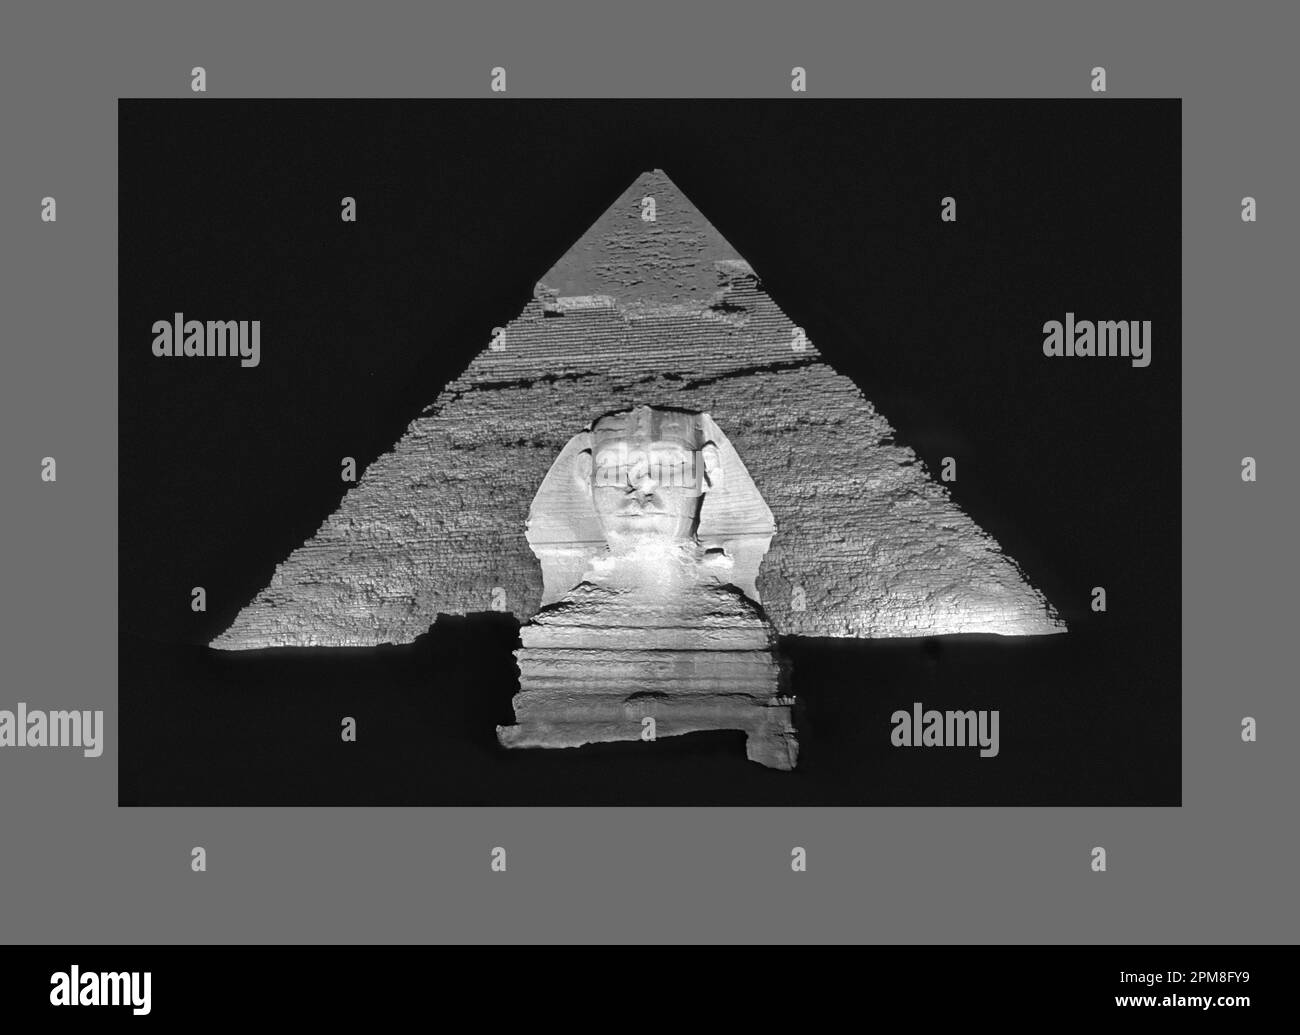 Egypt, Cairo. Gizeh or Giza. Sphinx in front of pyramid of Chephren. Sound and Light Show. Unesco, World Heritage Site. Black & White image. Stock Photo